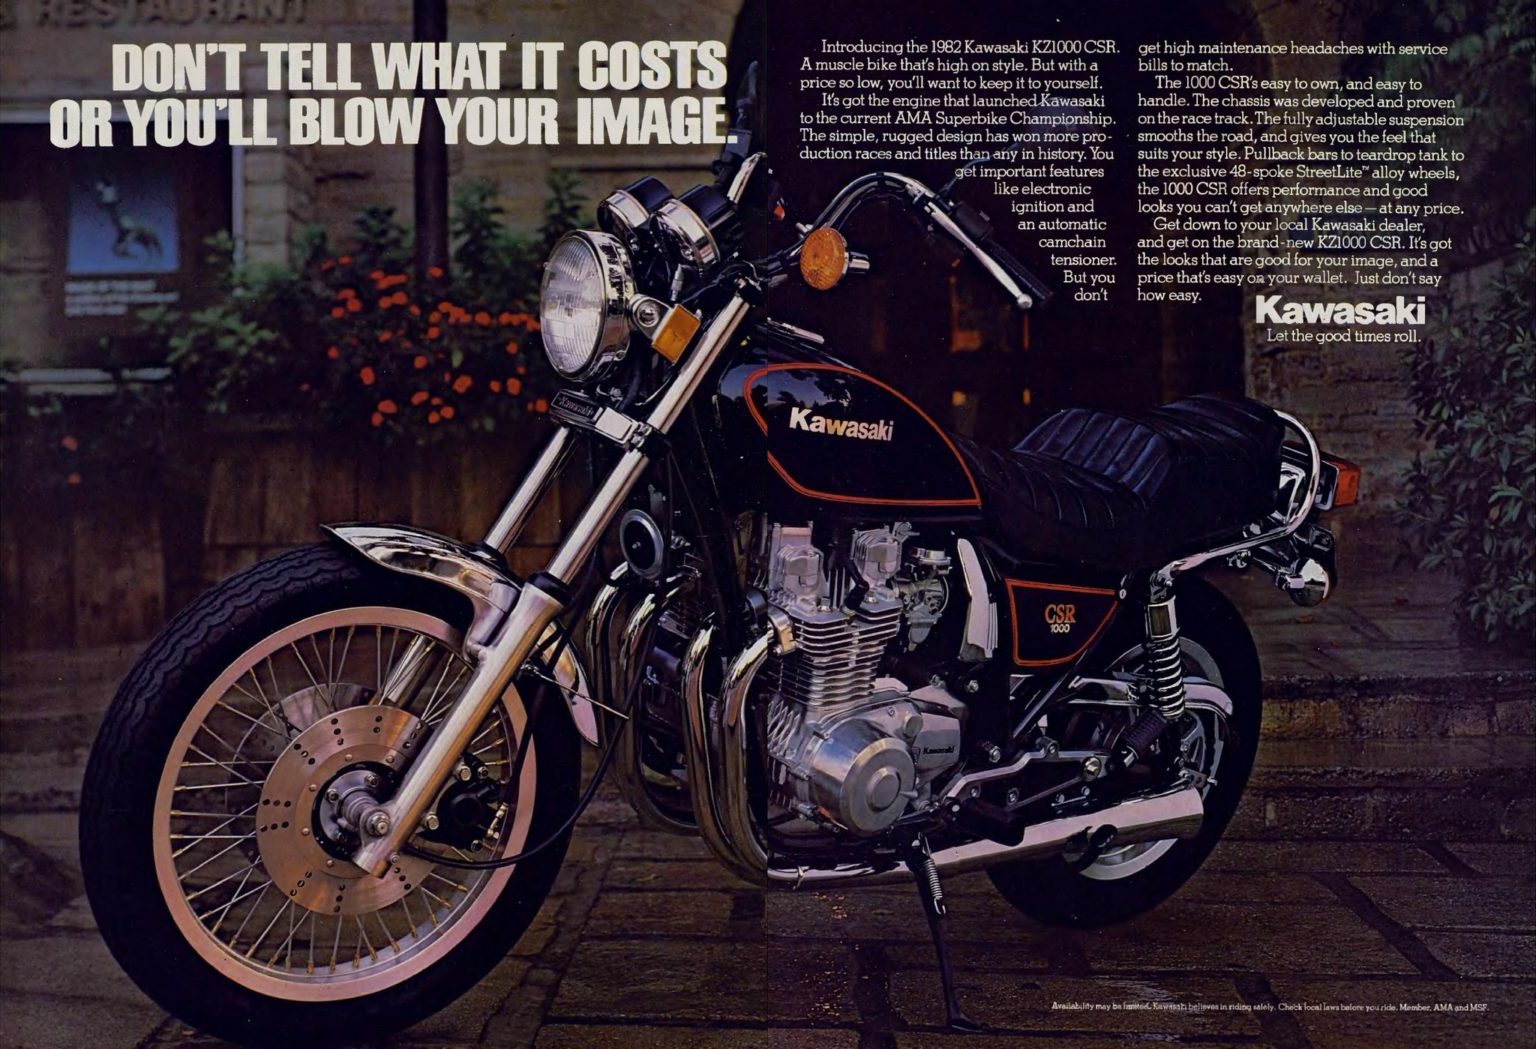 1982-Kawasaki-KZ1000-CSR.-Dont-Tell-What-It-Costs-Or-Youll-Blow-Your-Image-1536x1049